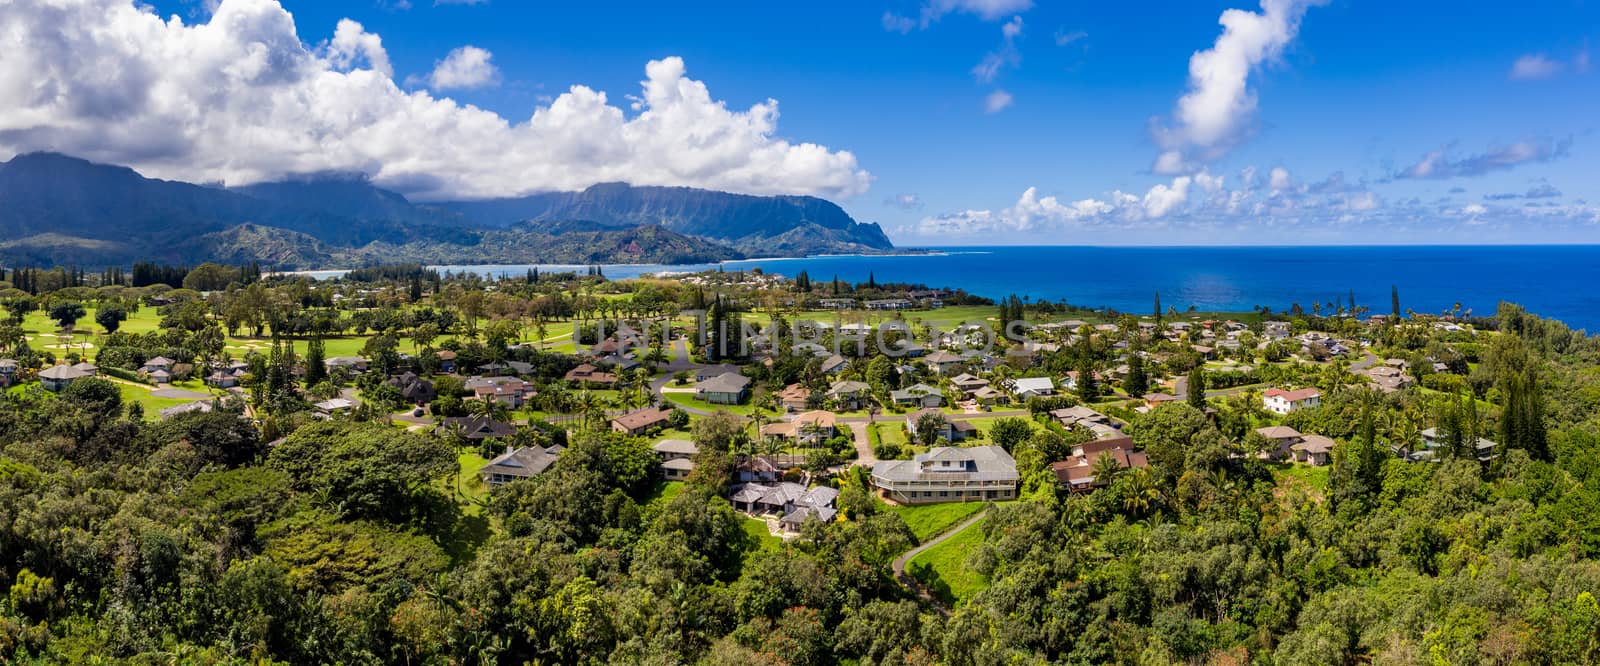 Aerial shot over Princeville with Hanalei Bay on north shore of Kauai in Hawaii by steheap